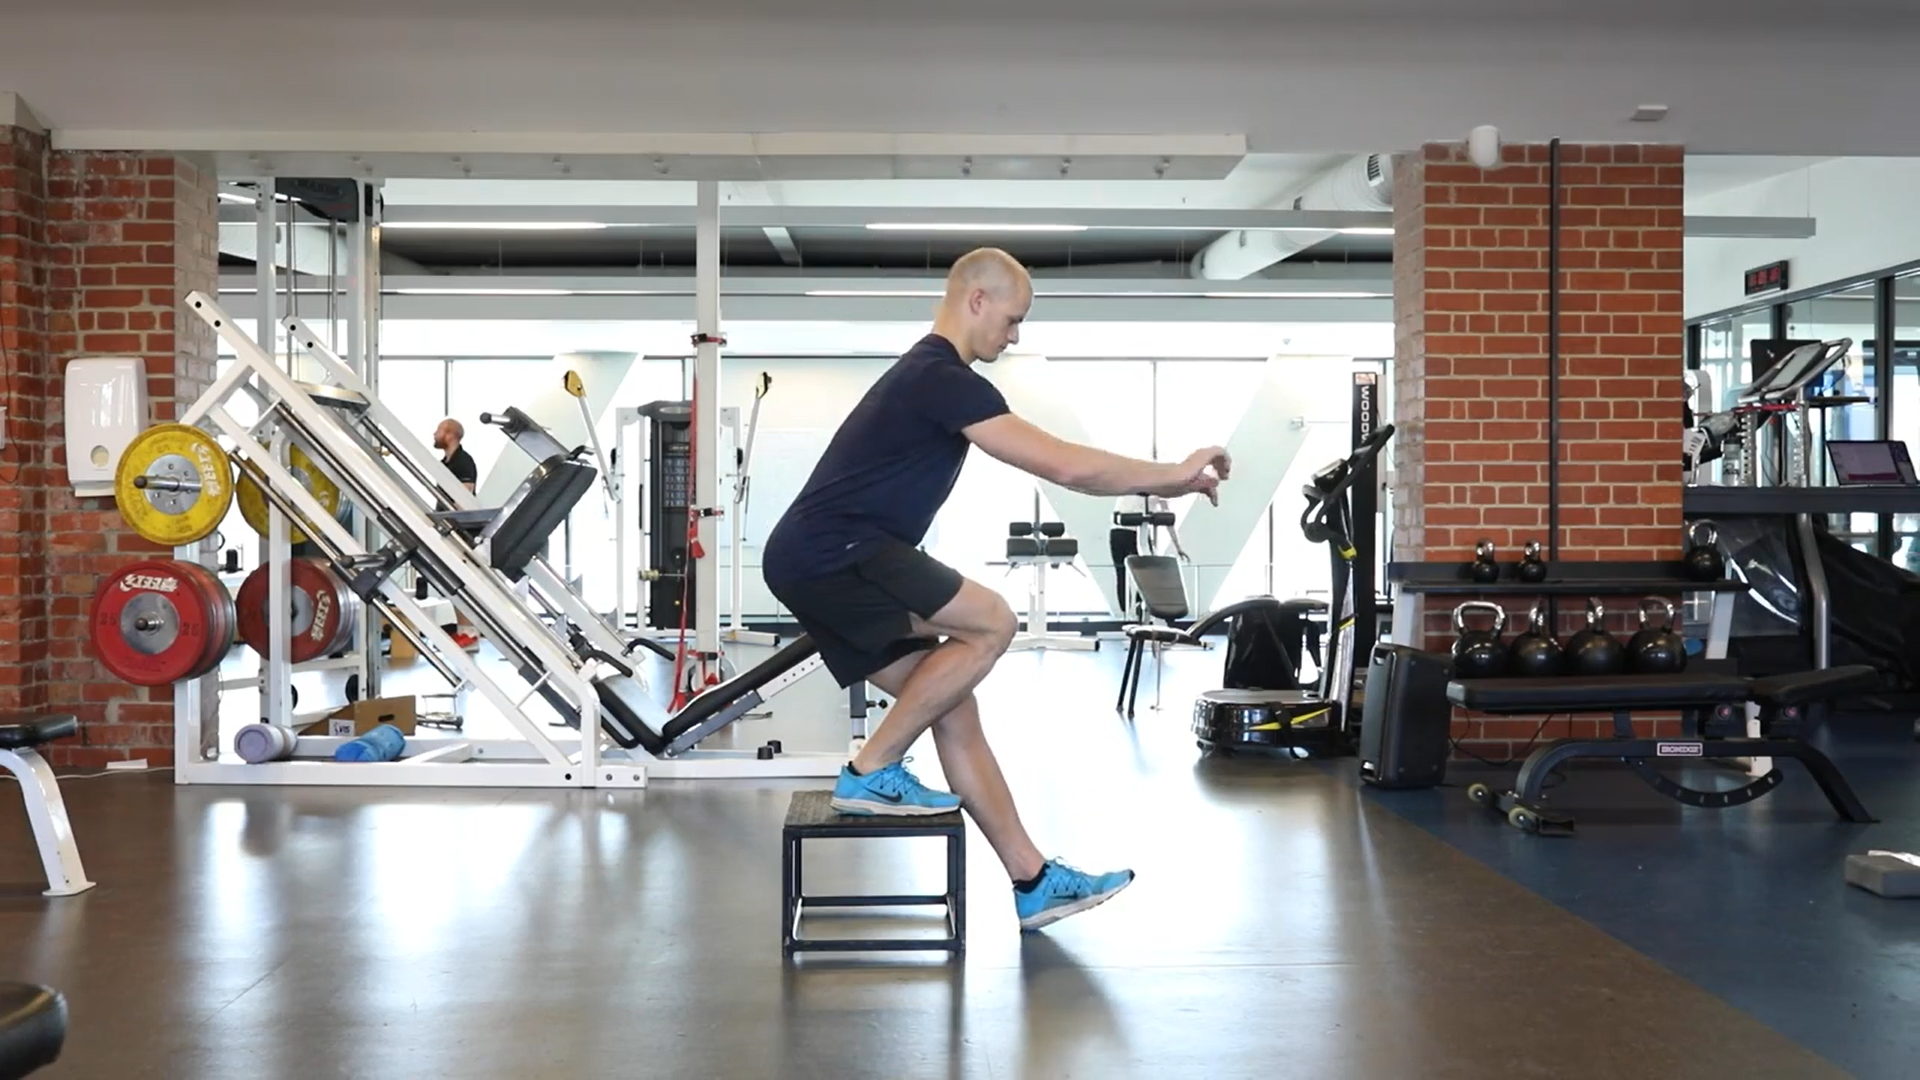 ACL recovery exercise: one foot on stool squatting exercise.